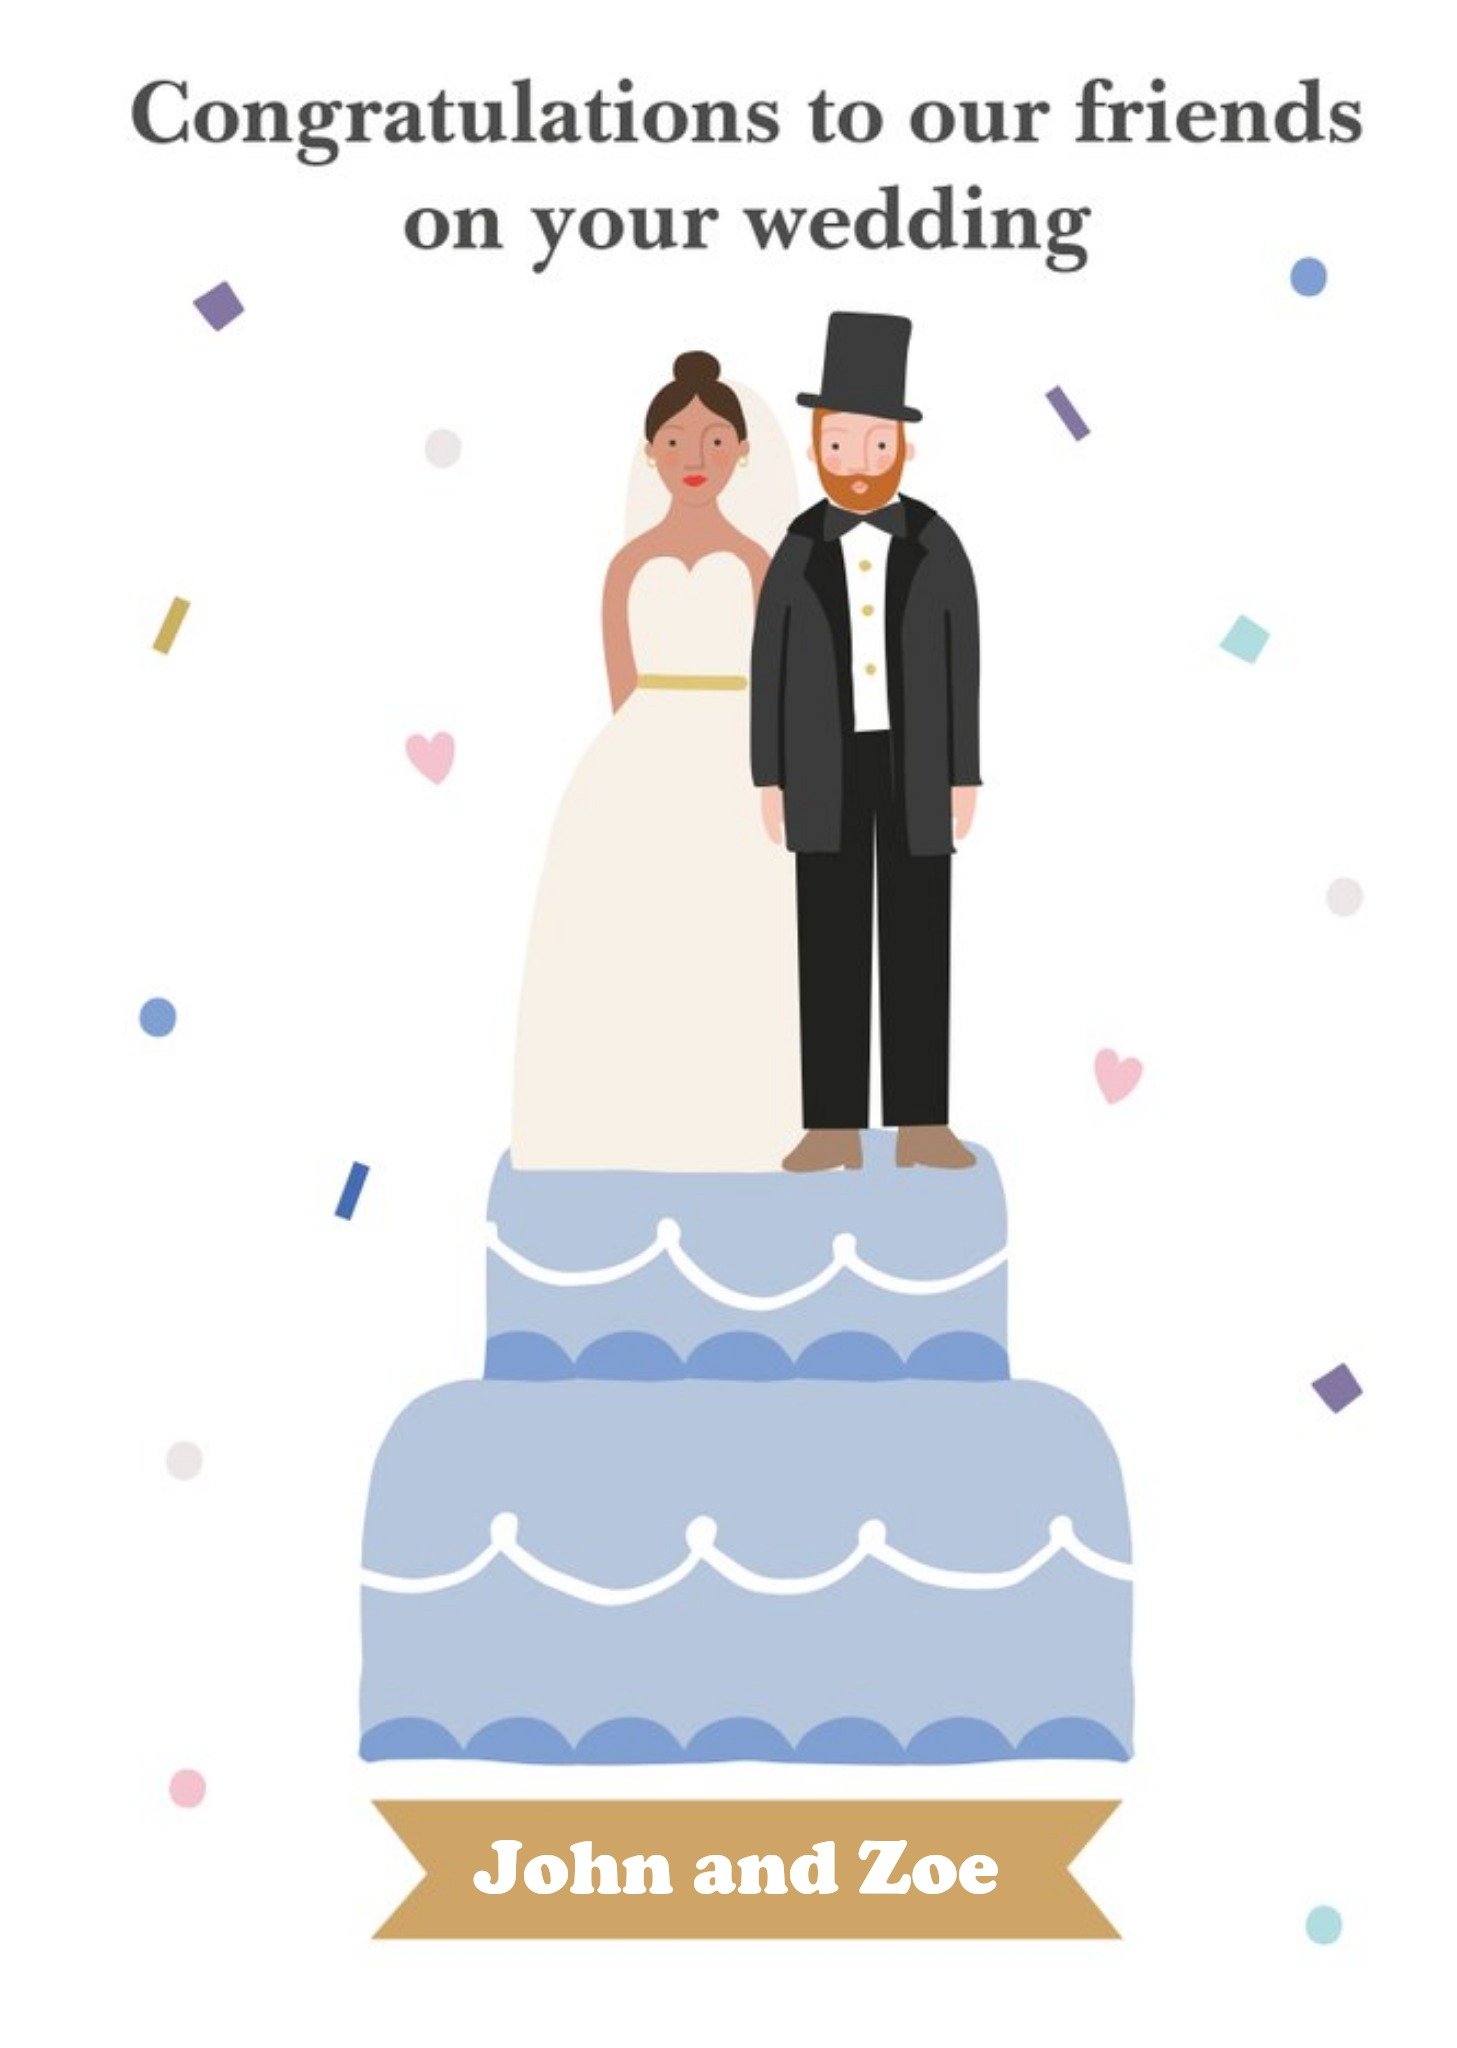 Moonpig Illustration Of Figurines On A Wedding Cake On Your Wedding Day Congratulations Card, Large